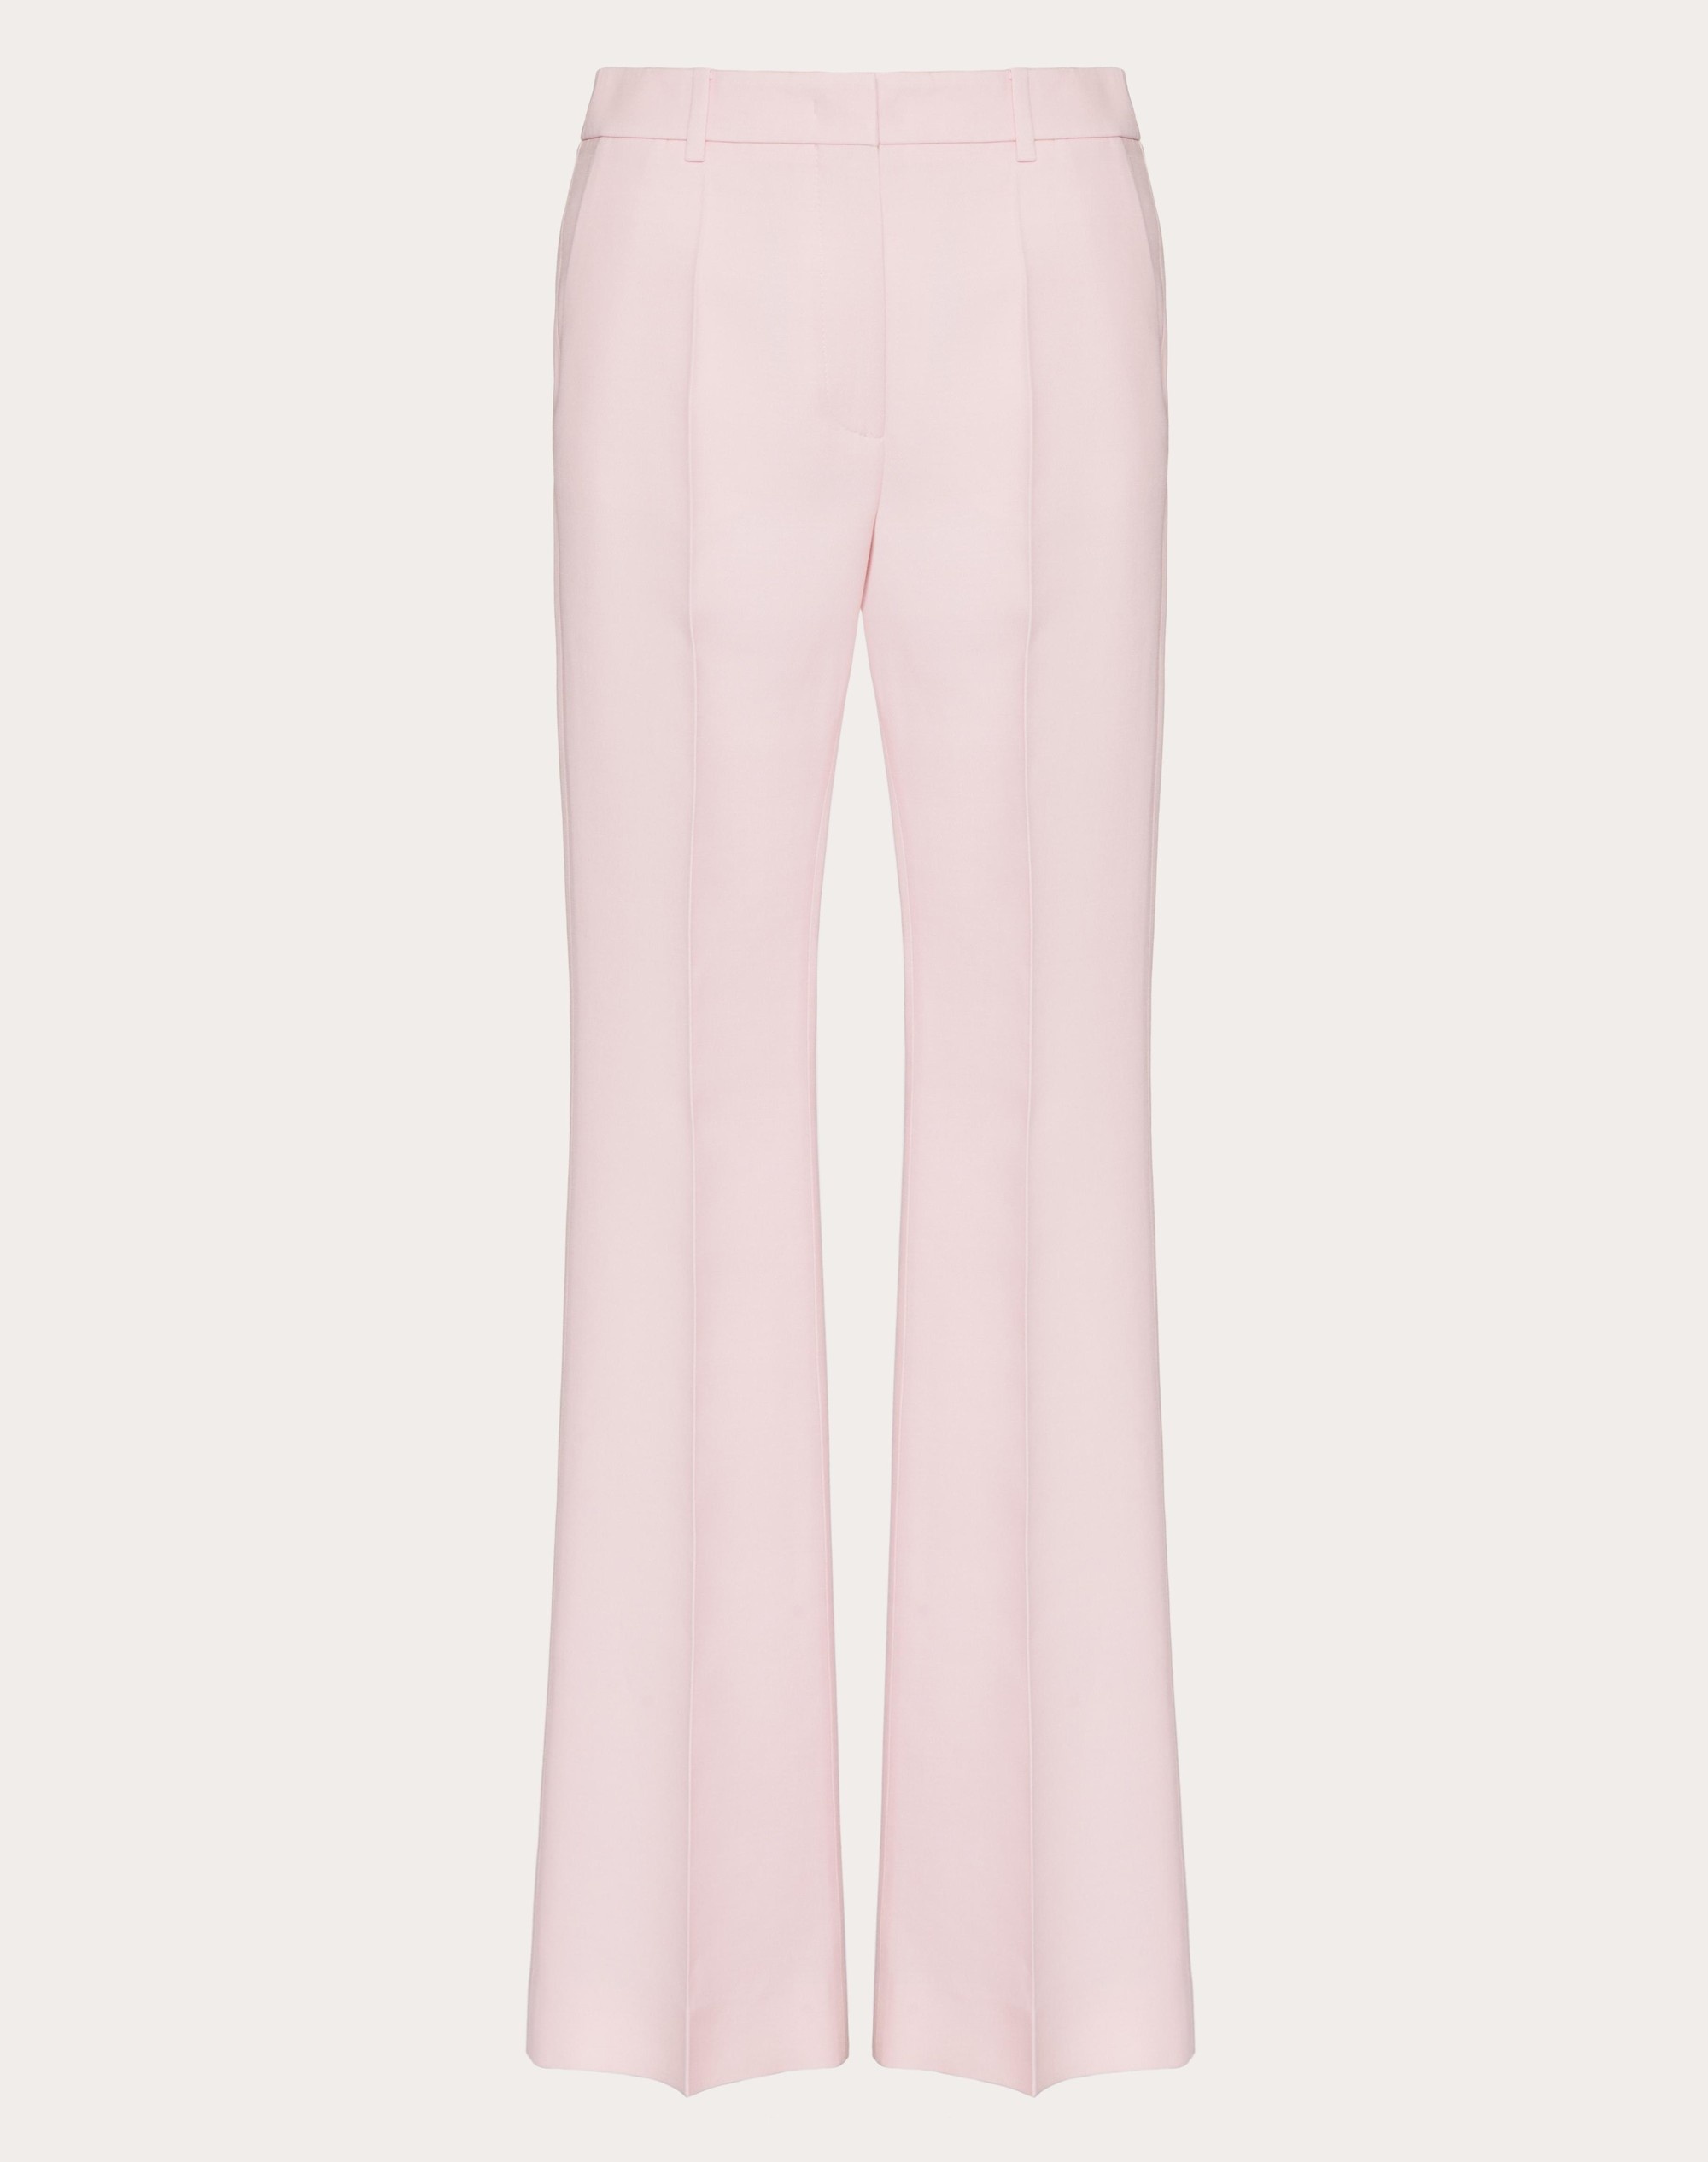 CREPE COUTURE TROUSERS - 1